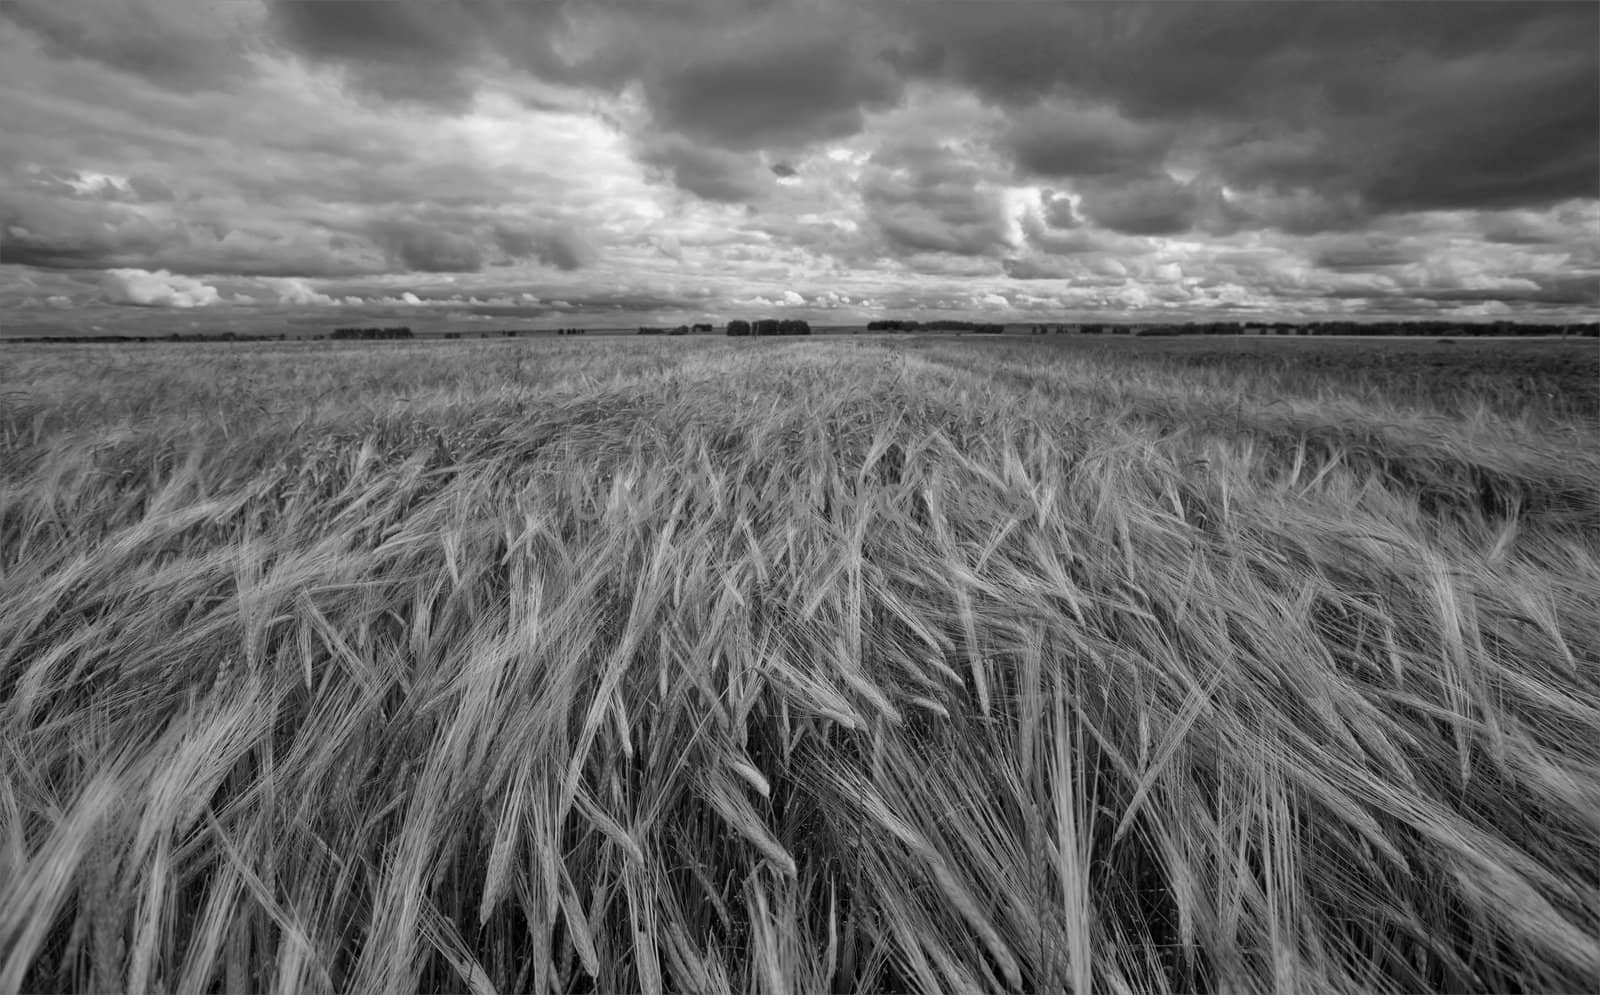 anxiety, autumn, cloud, cloudiness, corn, crops, field, gravity, horizon, landscape, lines, low, nature, rye, serenity, siberia, sky, storm, summer, valley, wave, wide, wind